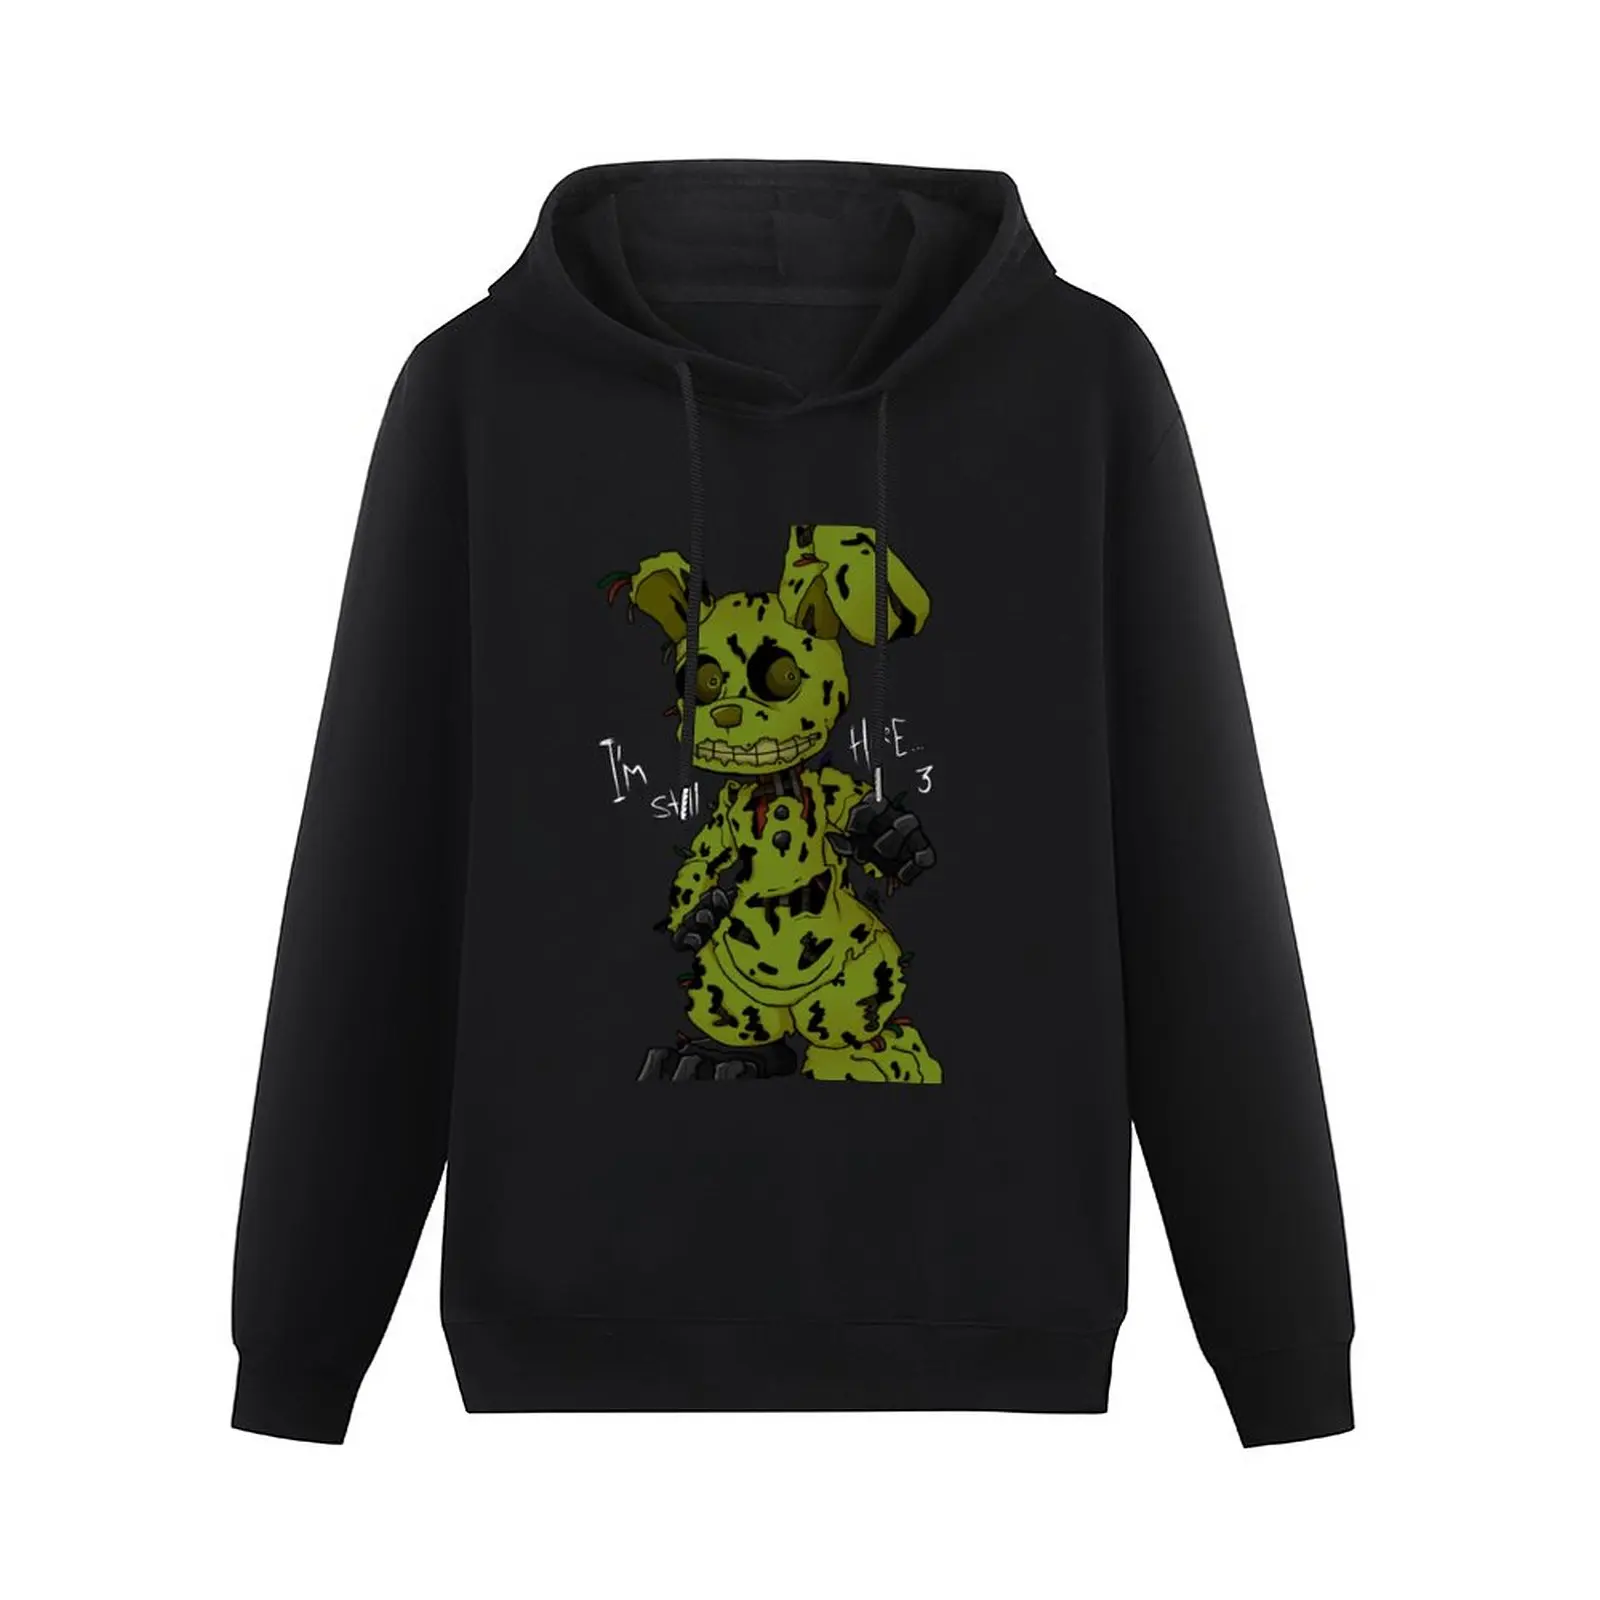 New FNAF 3 Springtrap Pullover Hoodie streetwear men essentials men s autumn clothes new features of 2 - FNAF Plush